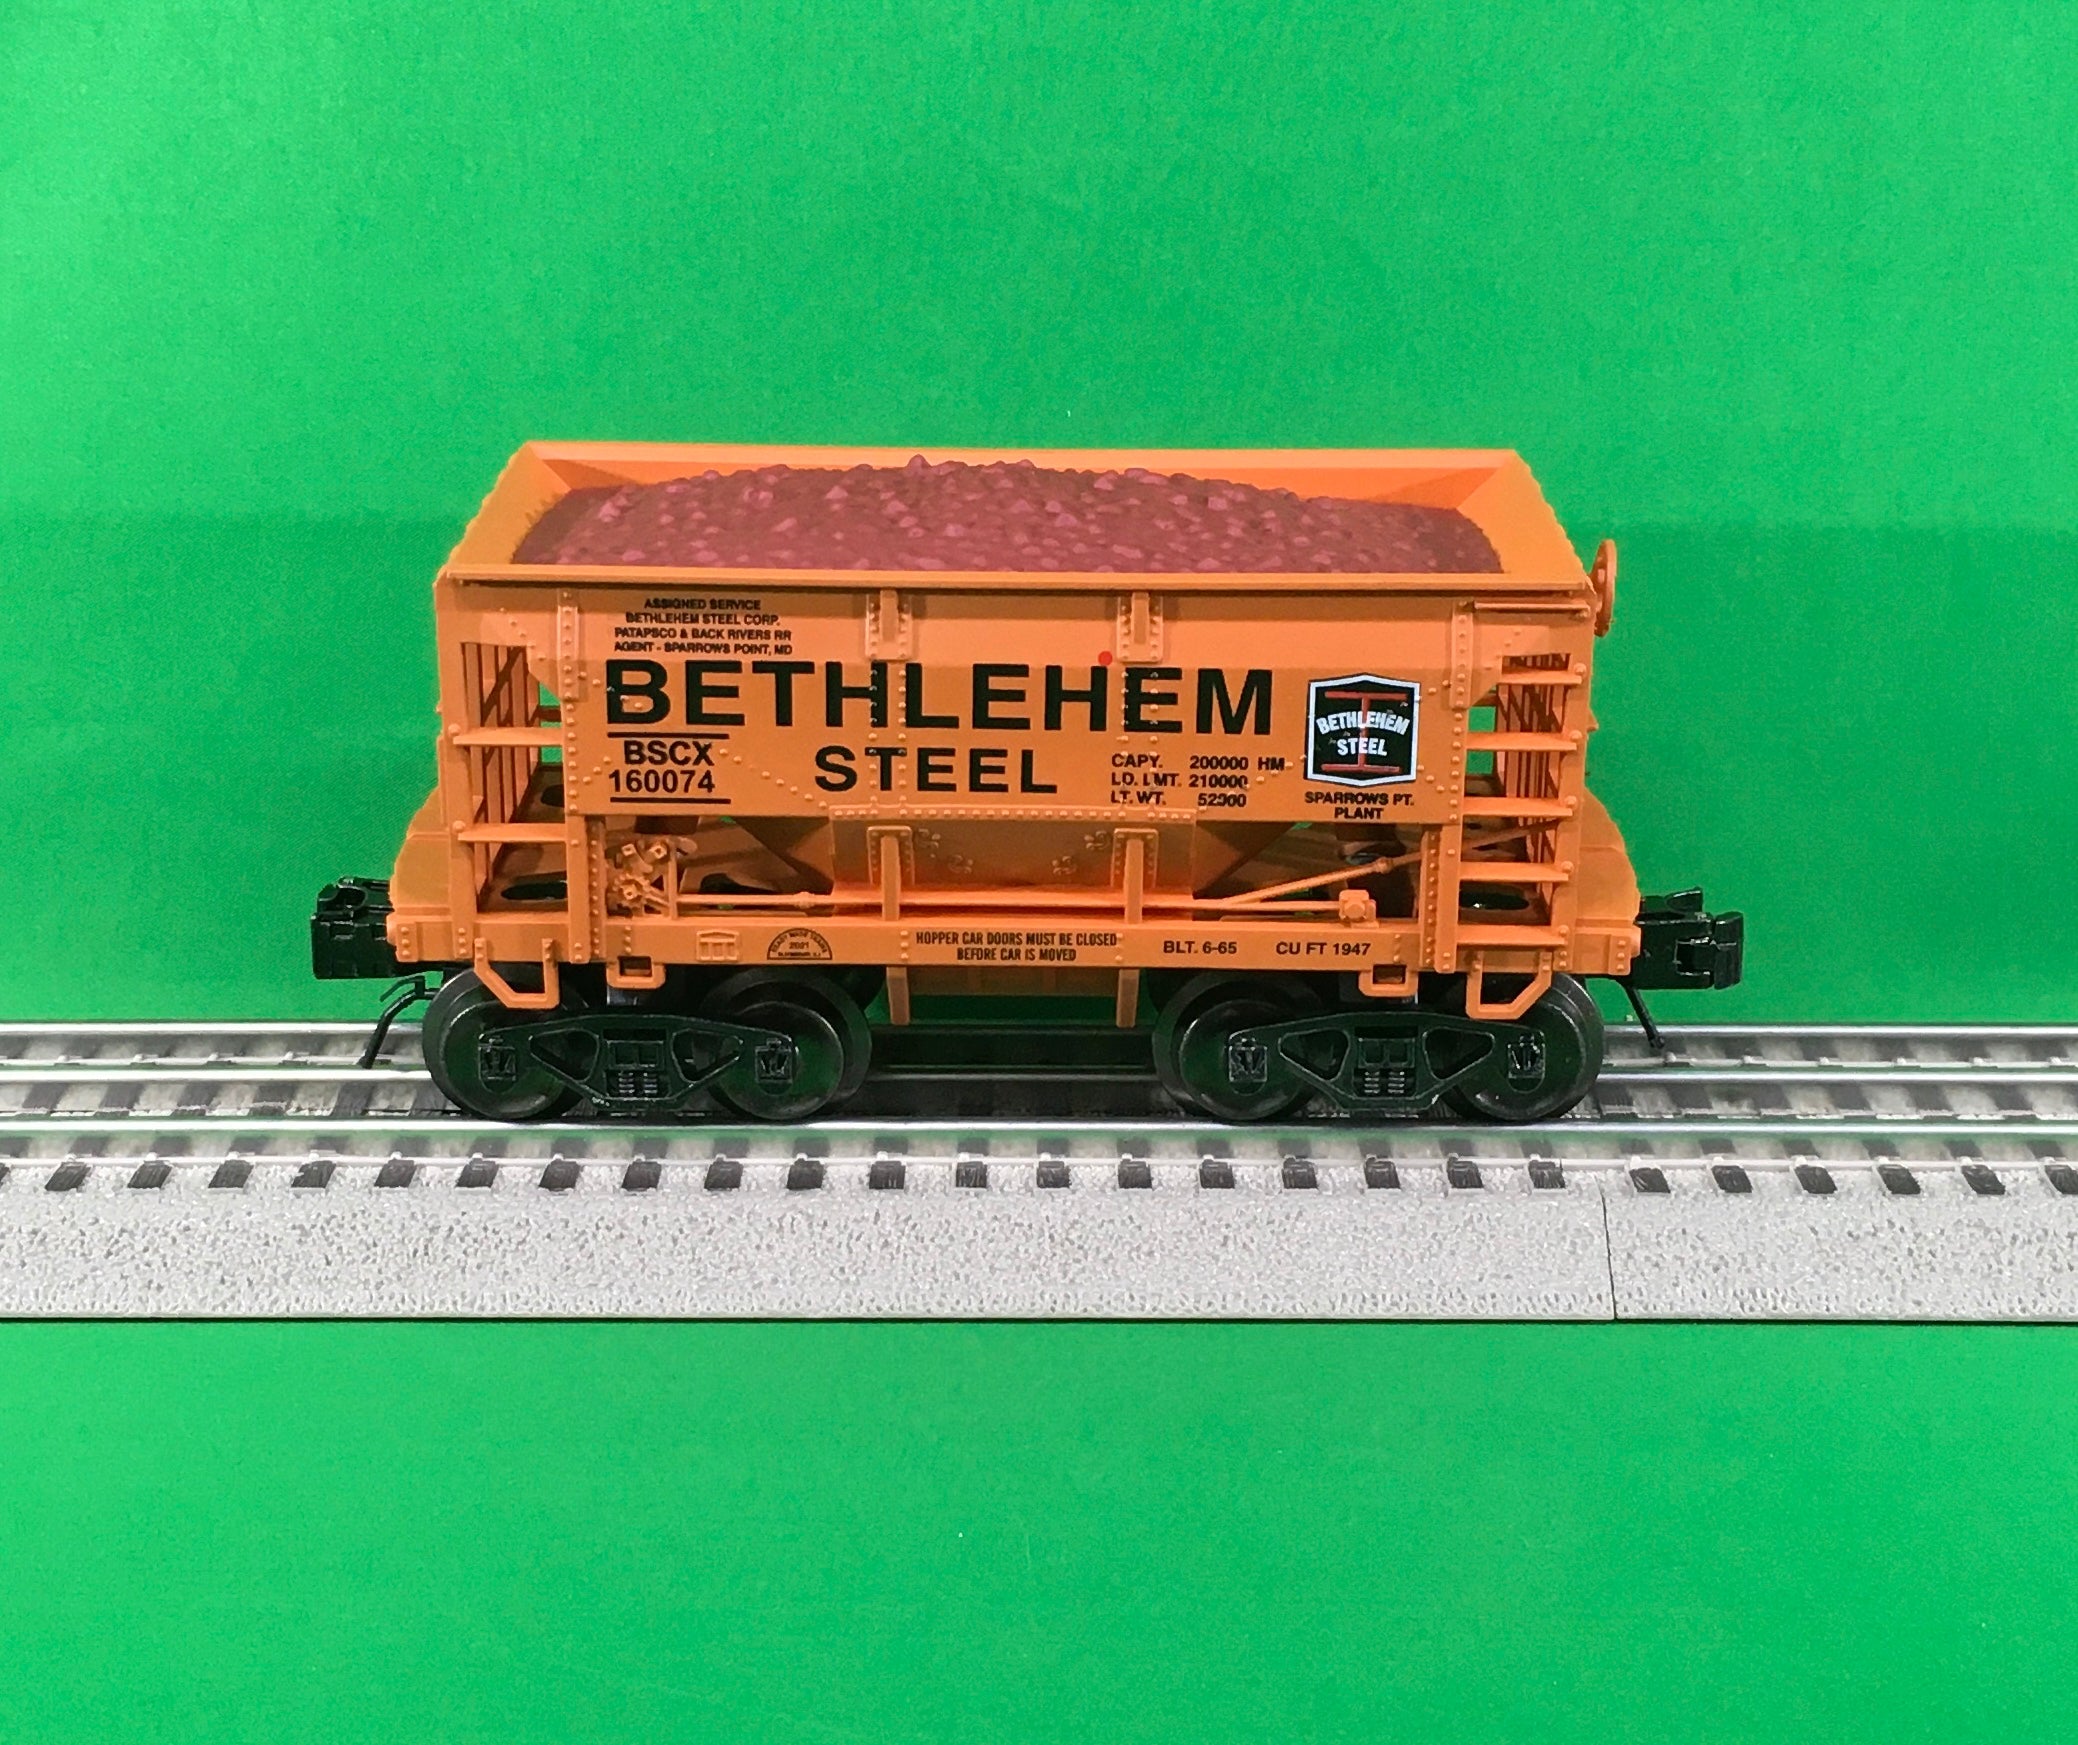 Ready Made Trains RMT-96719-321 - Ore Car "Bethlehem Steel" (Sparrows Point, MD Plant)